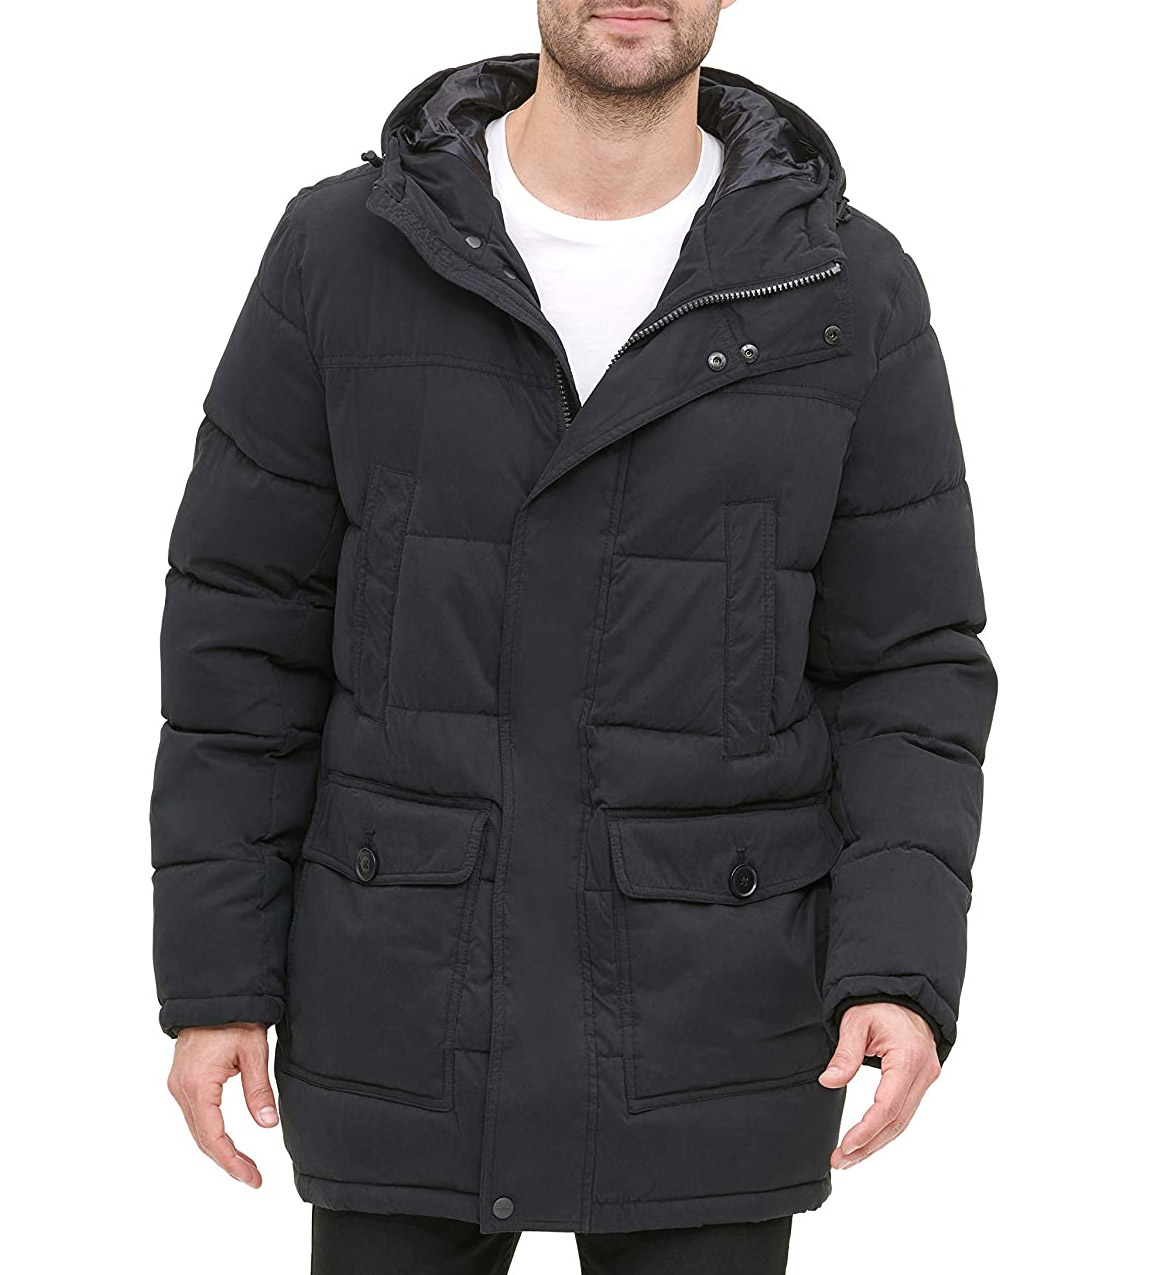 Stay Warm In The Icy Cold With One Of These 12 Best Winter Parkas For ...